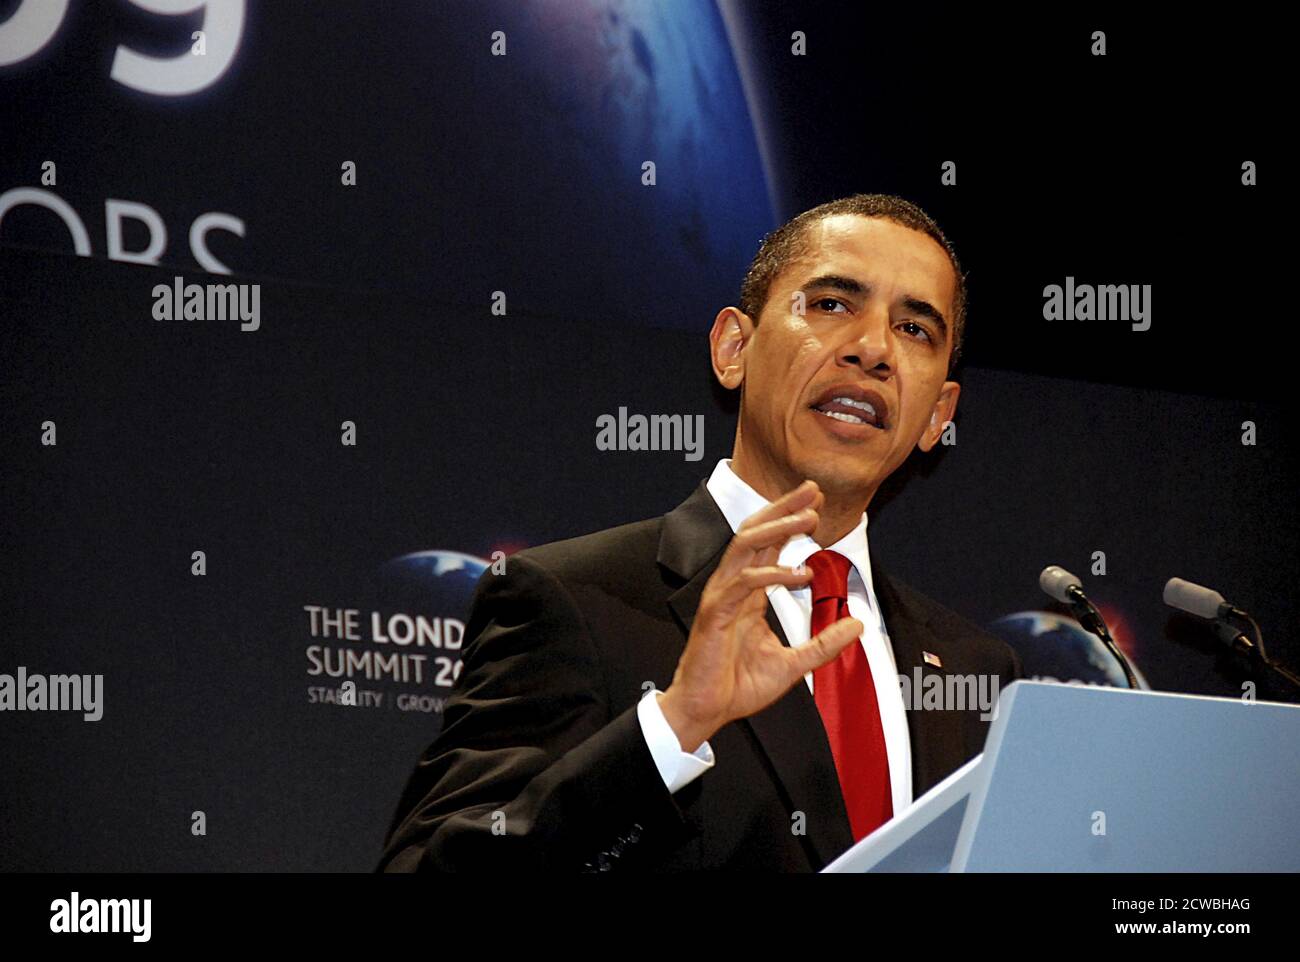 Photograph of Barack Obama speaking at the 2009 G20 London Summit. Barack Hussein Obama II (1961-) an American attorney and served as the 44th President of the United States. Stock Photo